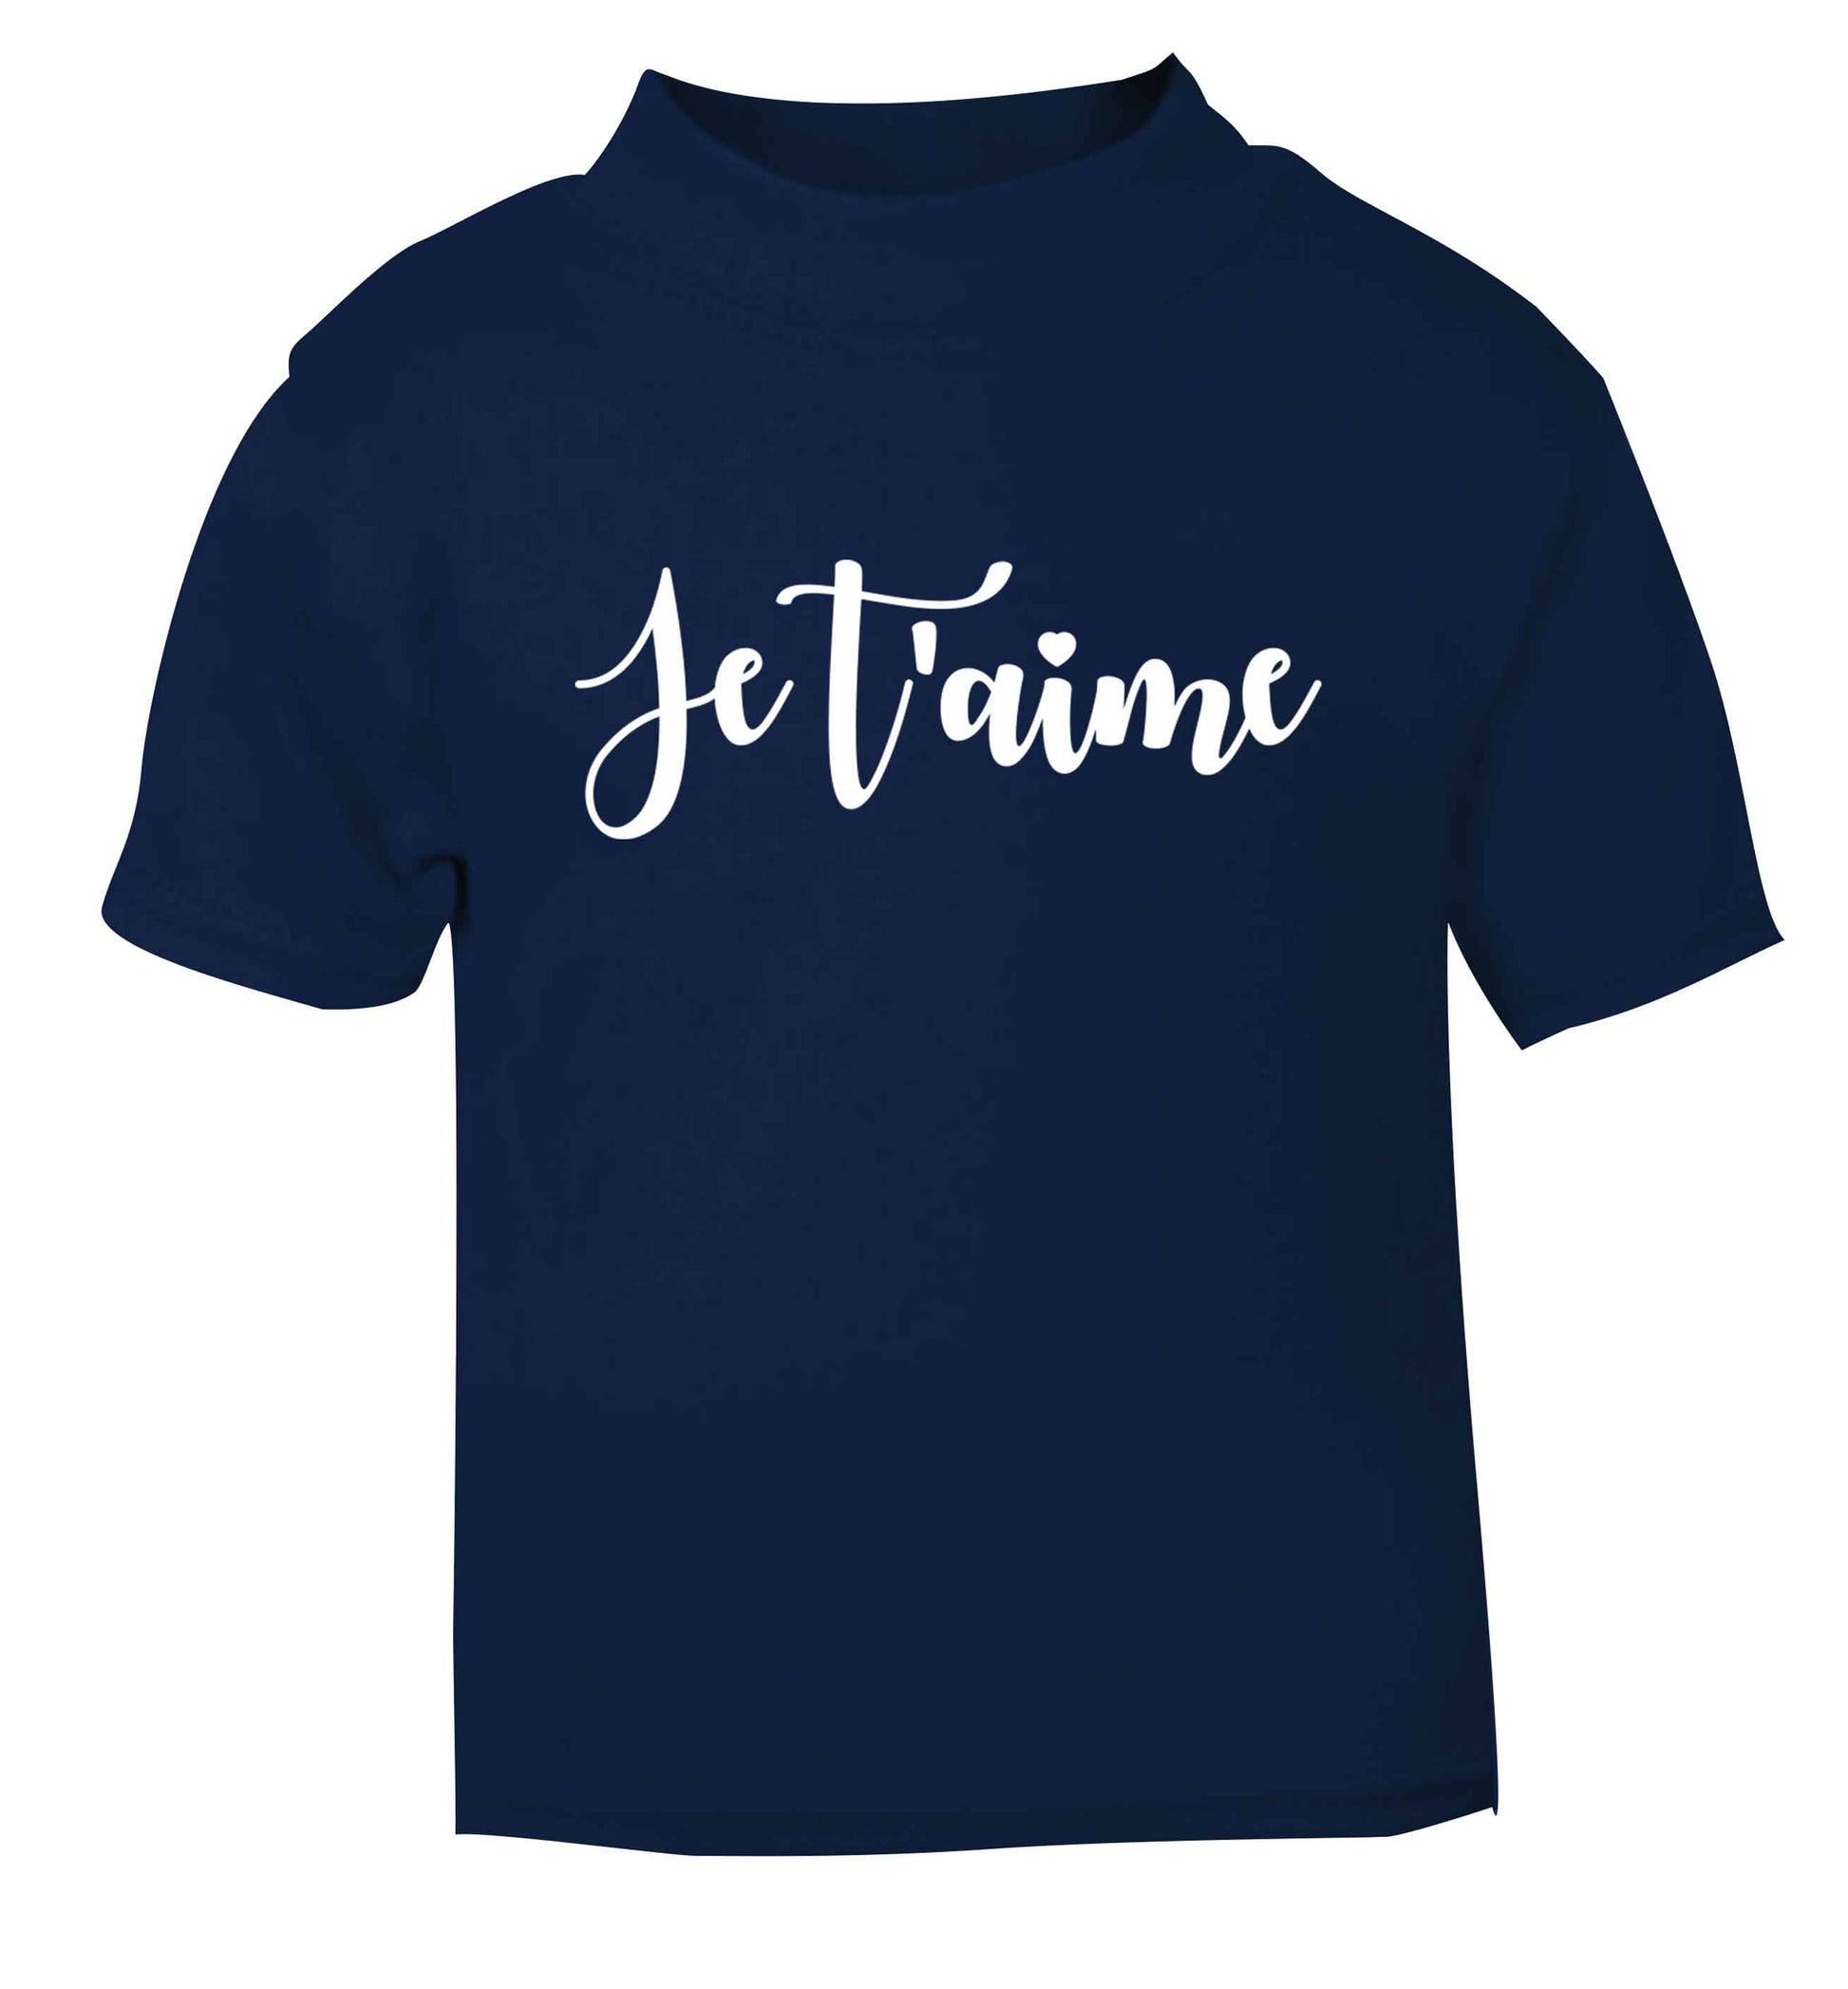 Je t'aime navy baby toddler Tshirt 2 Years